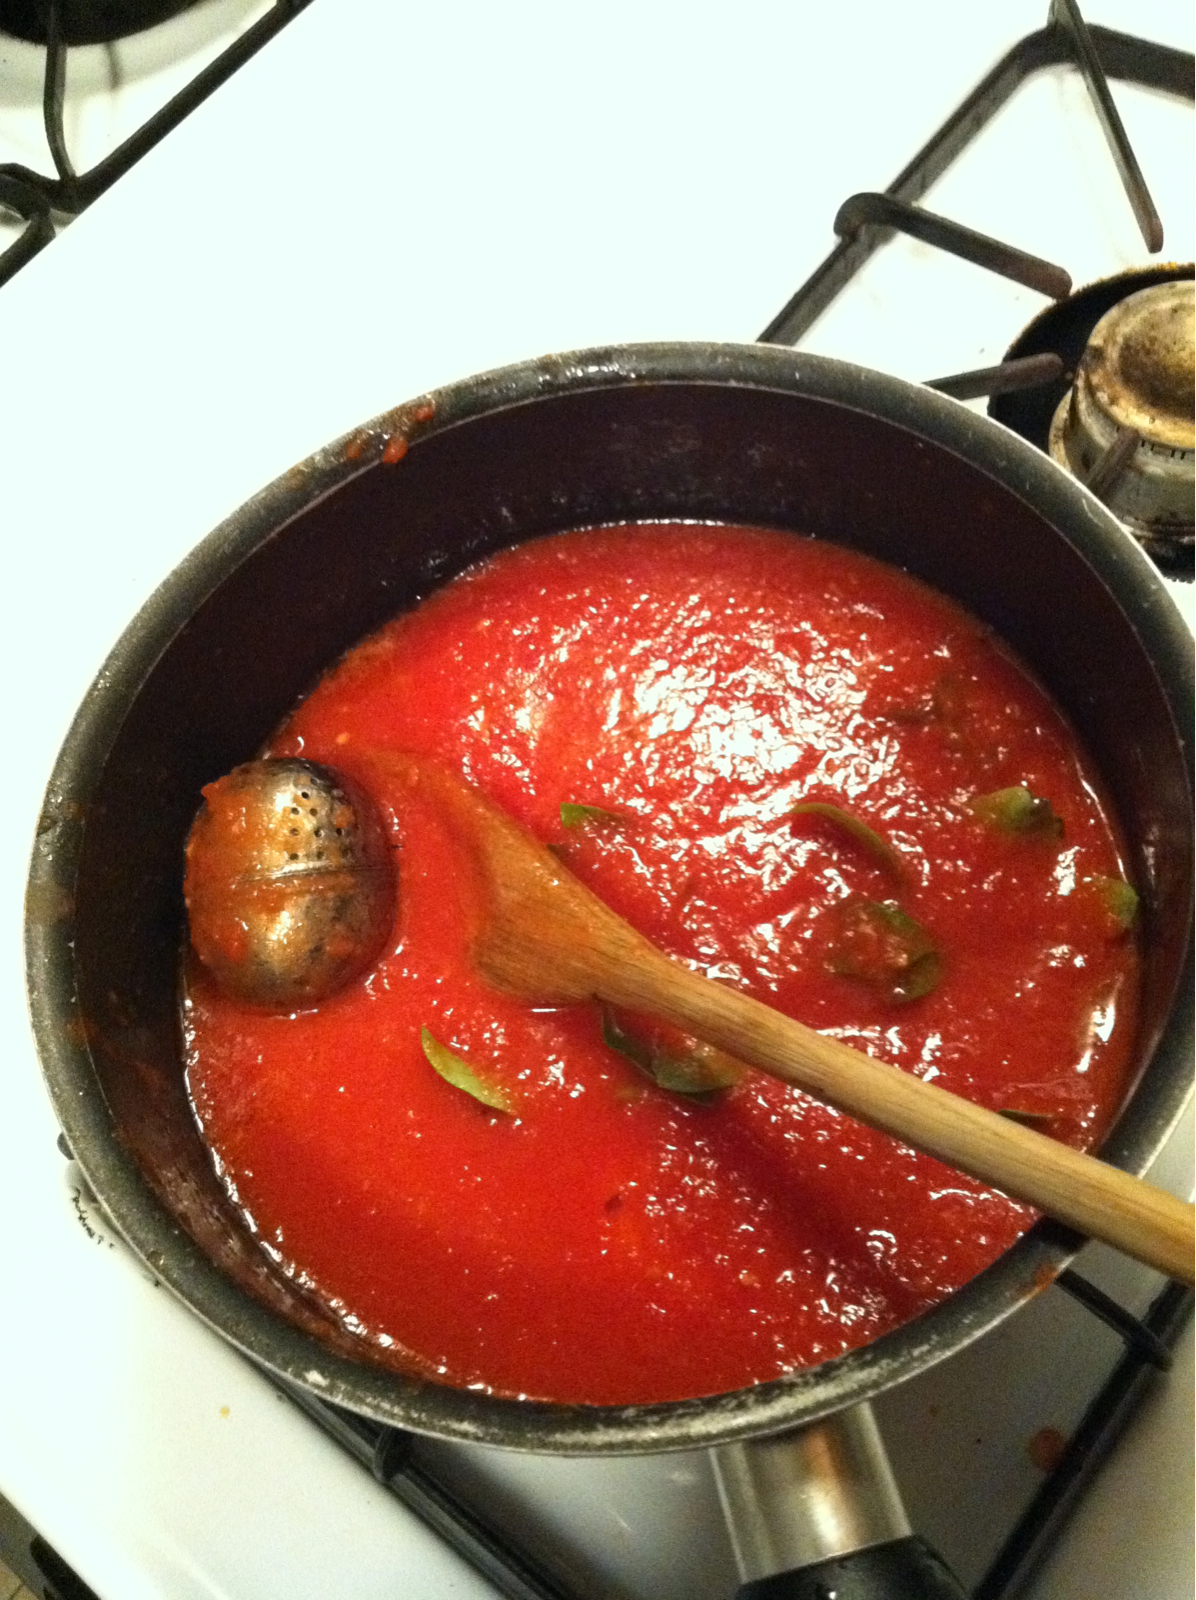 tomato sauce being prepared in a pot on the stove